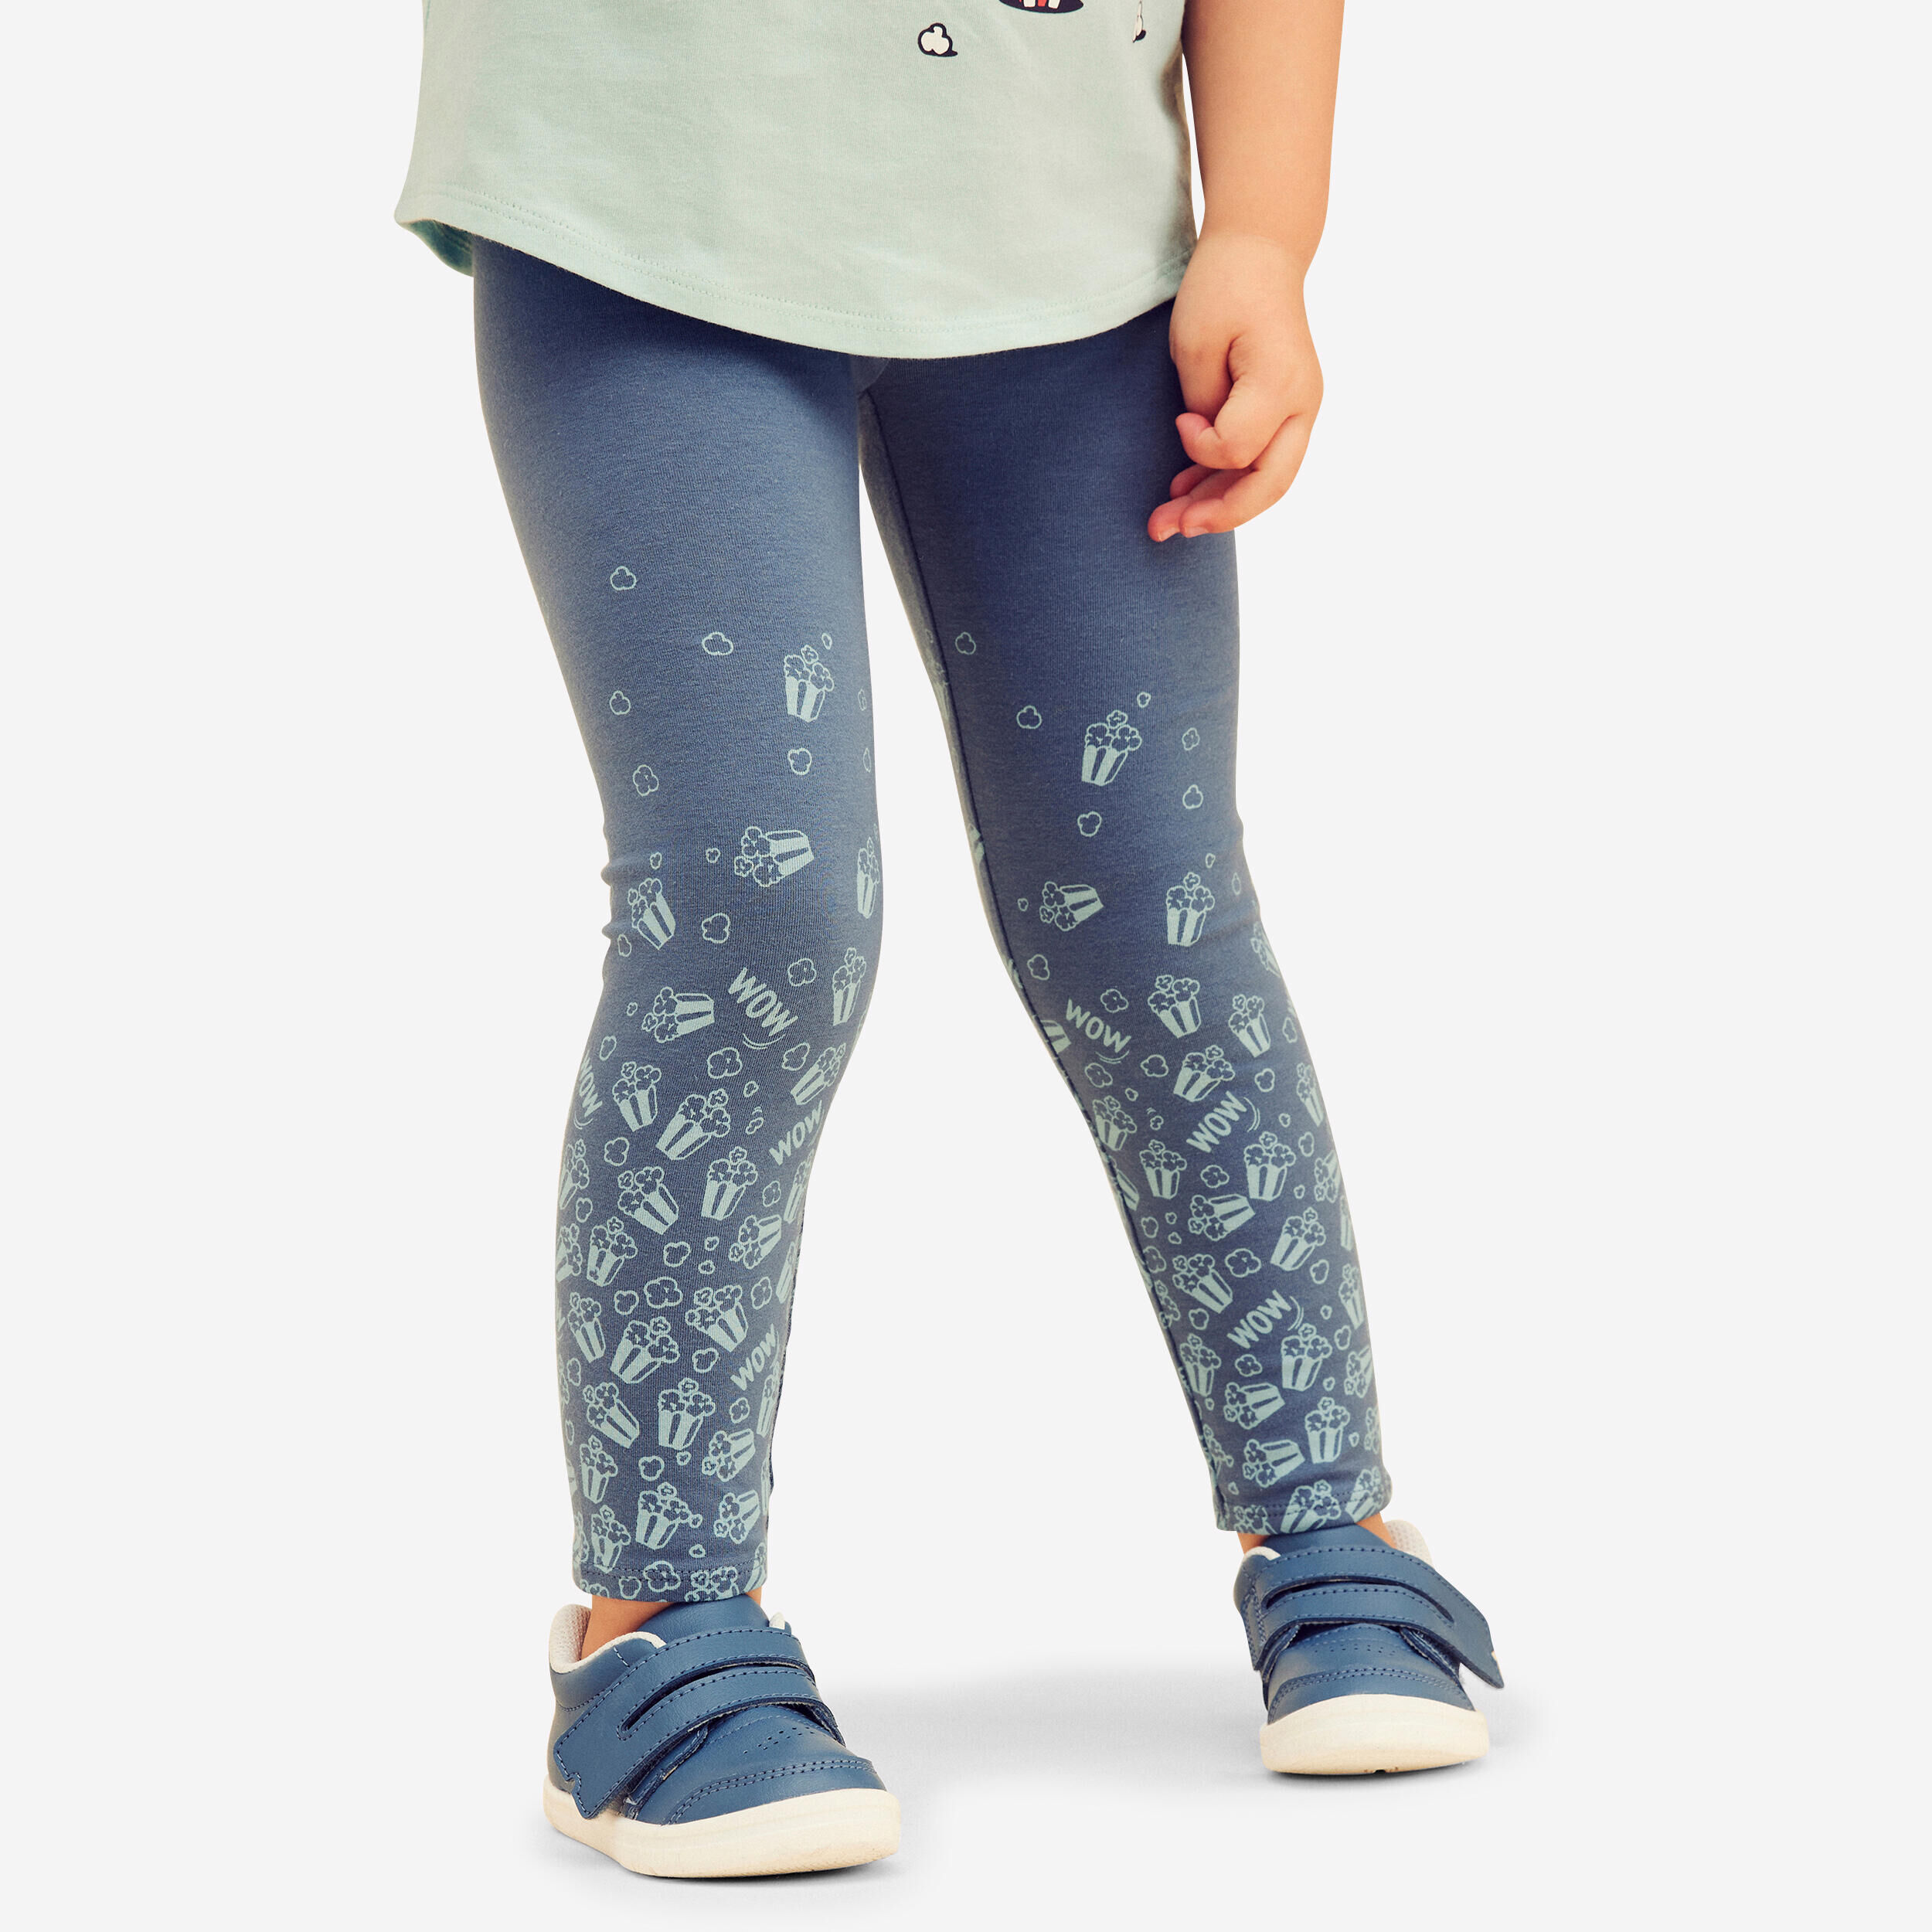 DOMYOS Baby Basic Cotton Leggings - Blue/Turquoise with Patterns